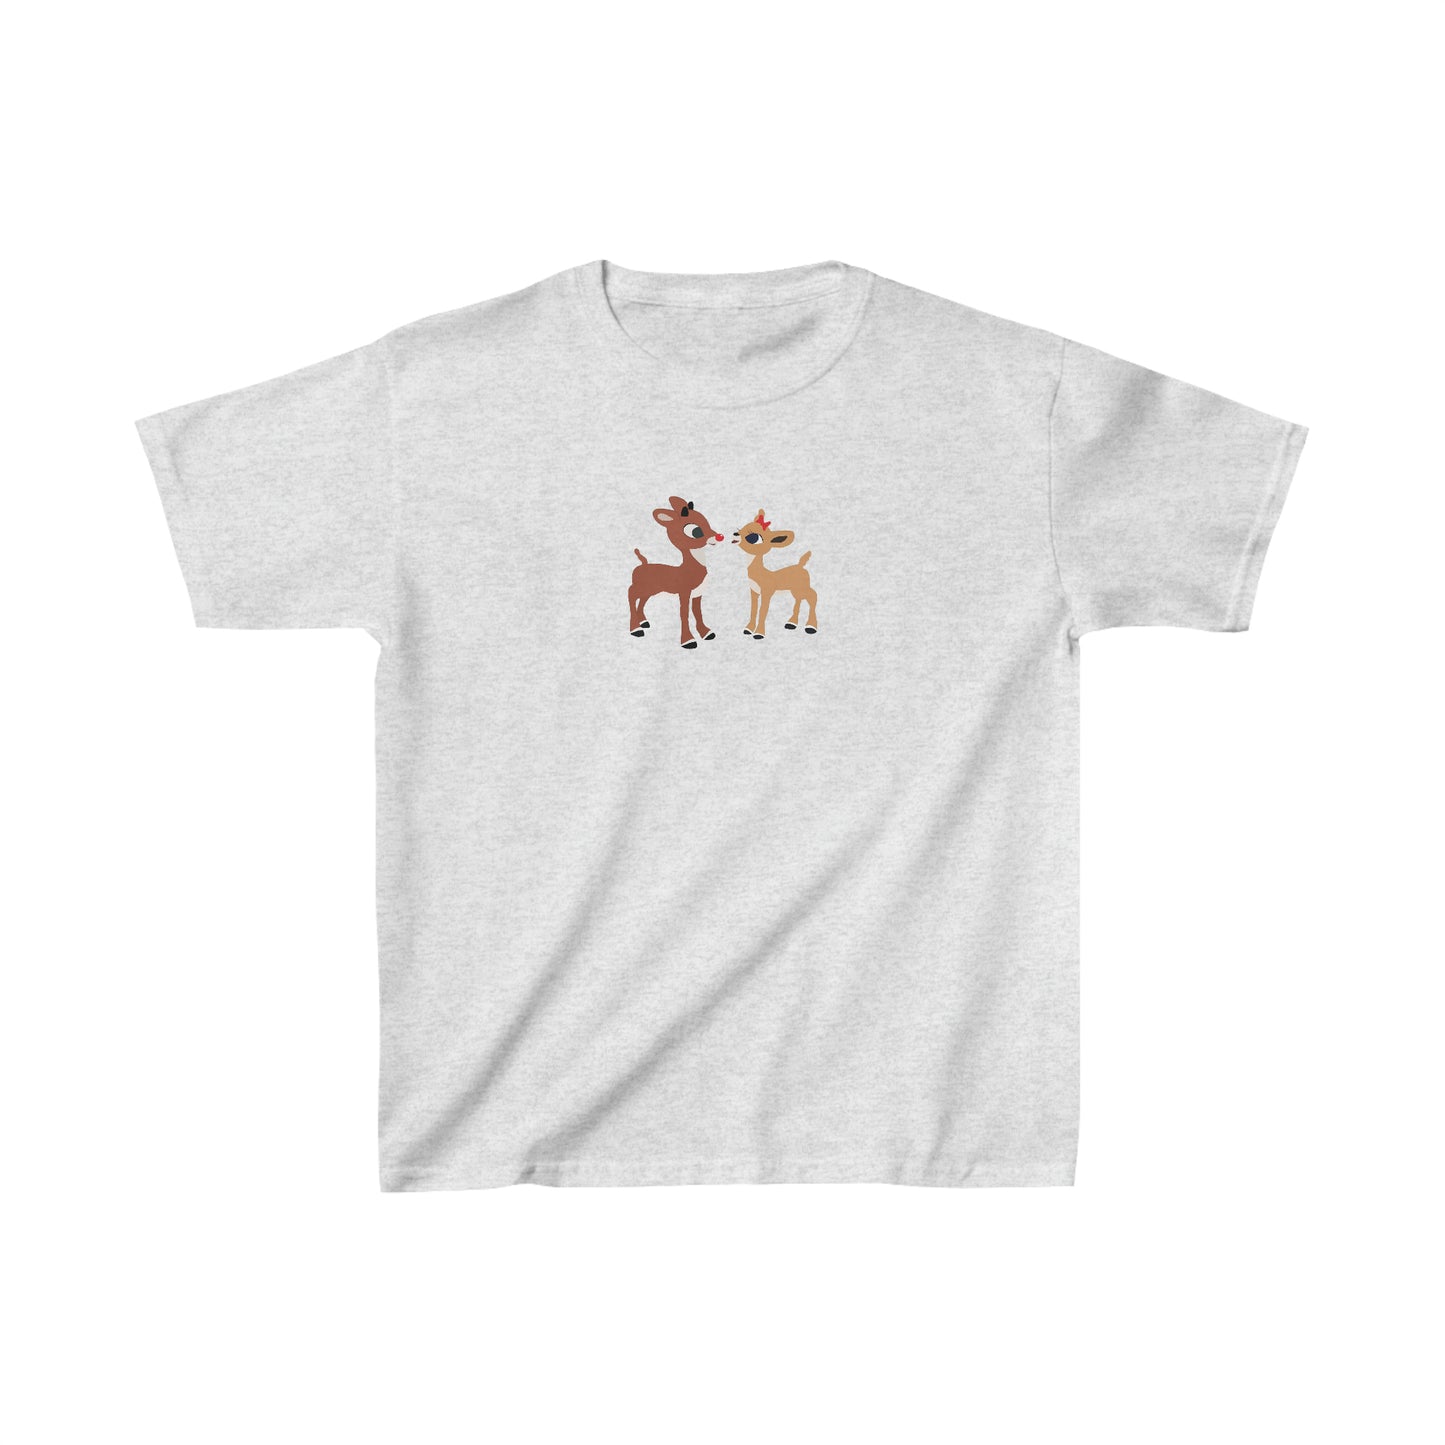 Rudolph The Red Nose Reindeer Kids Heavy Cotton Tee